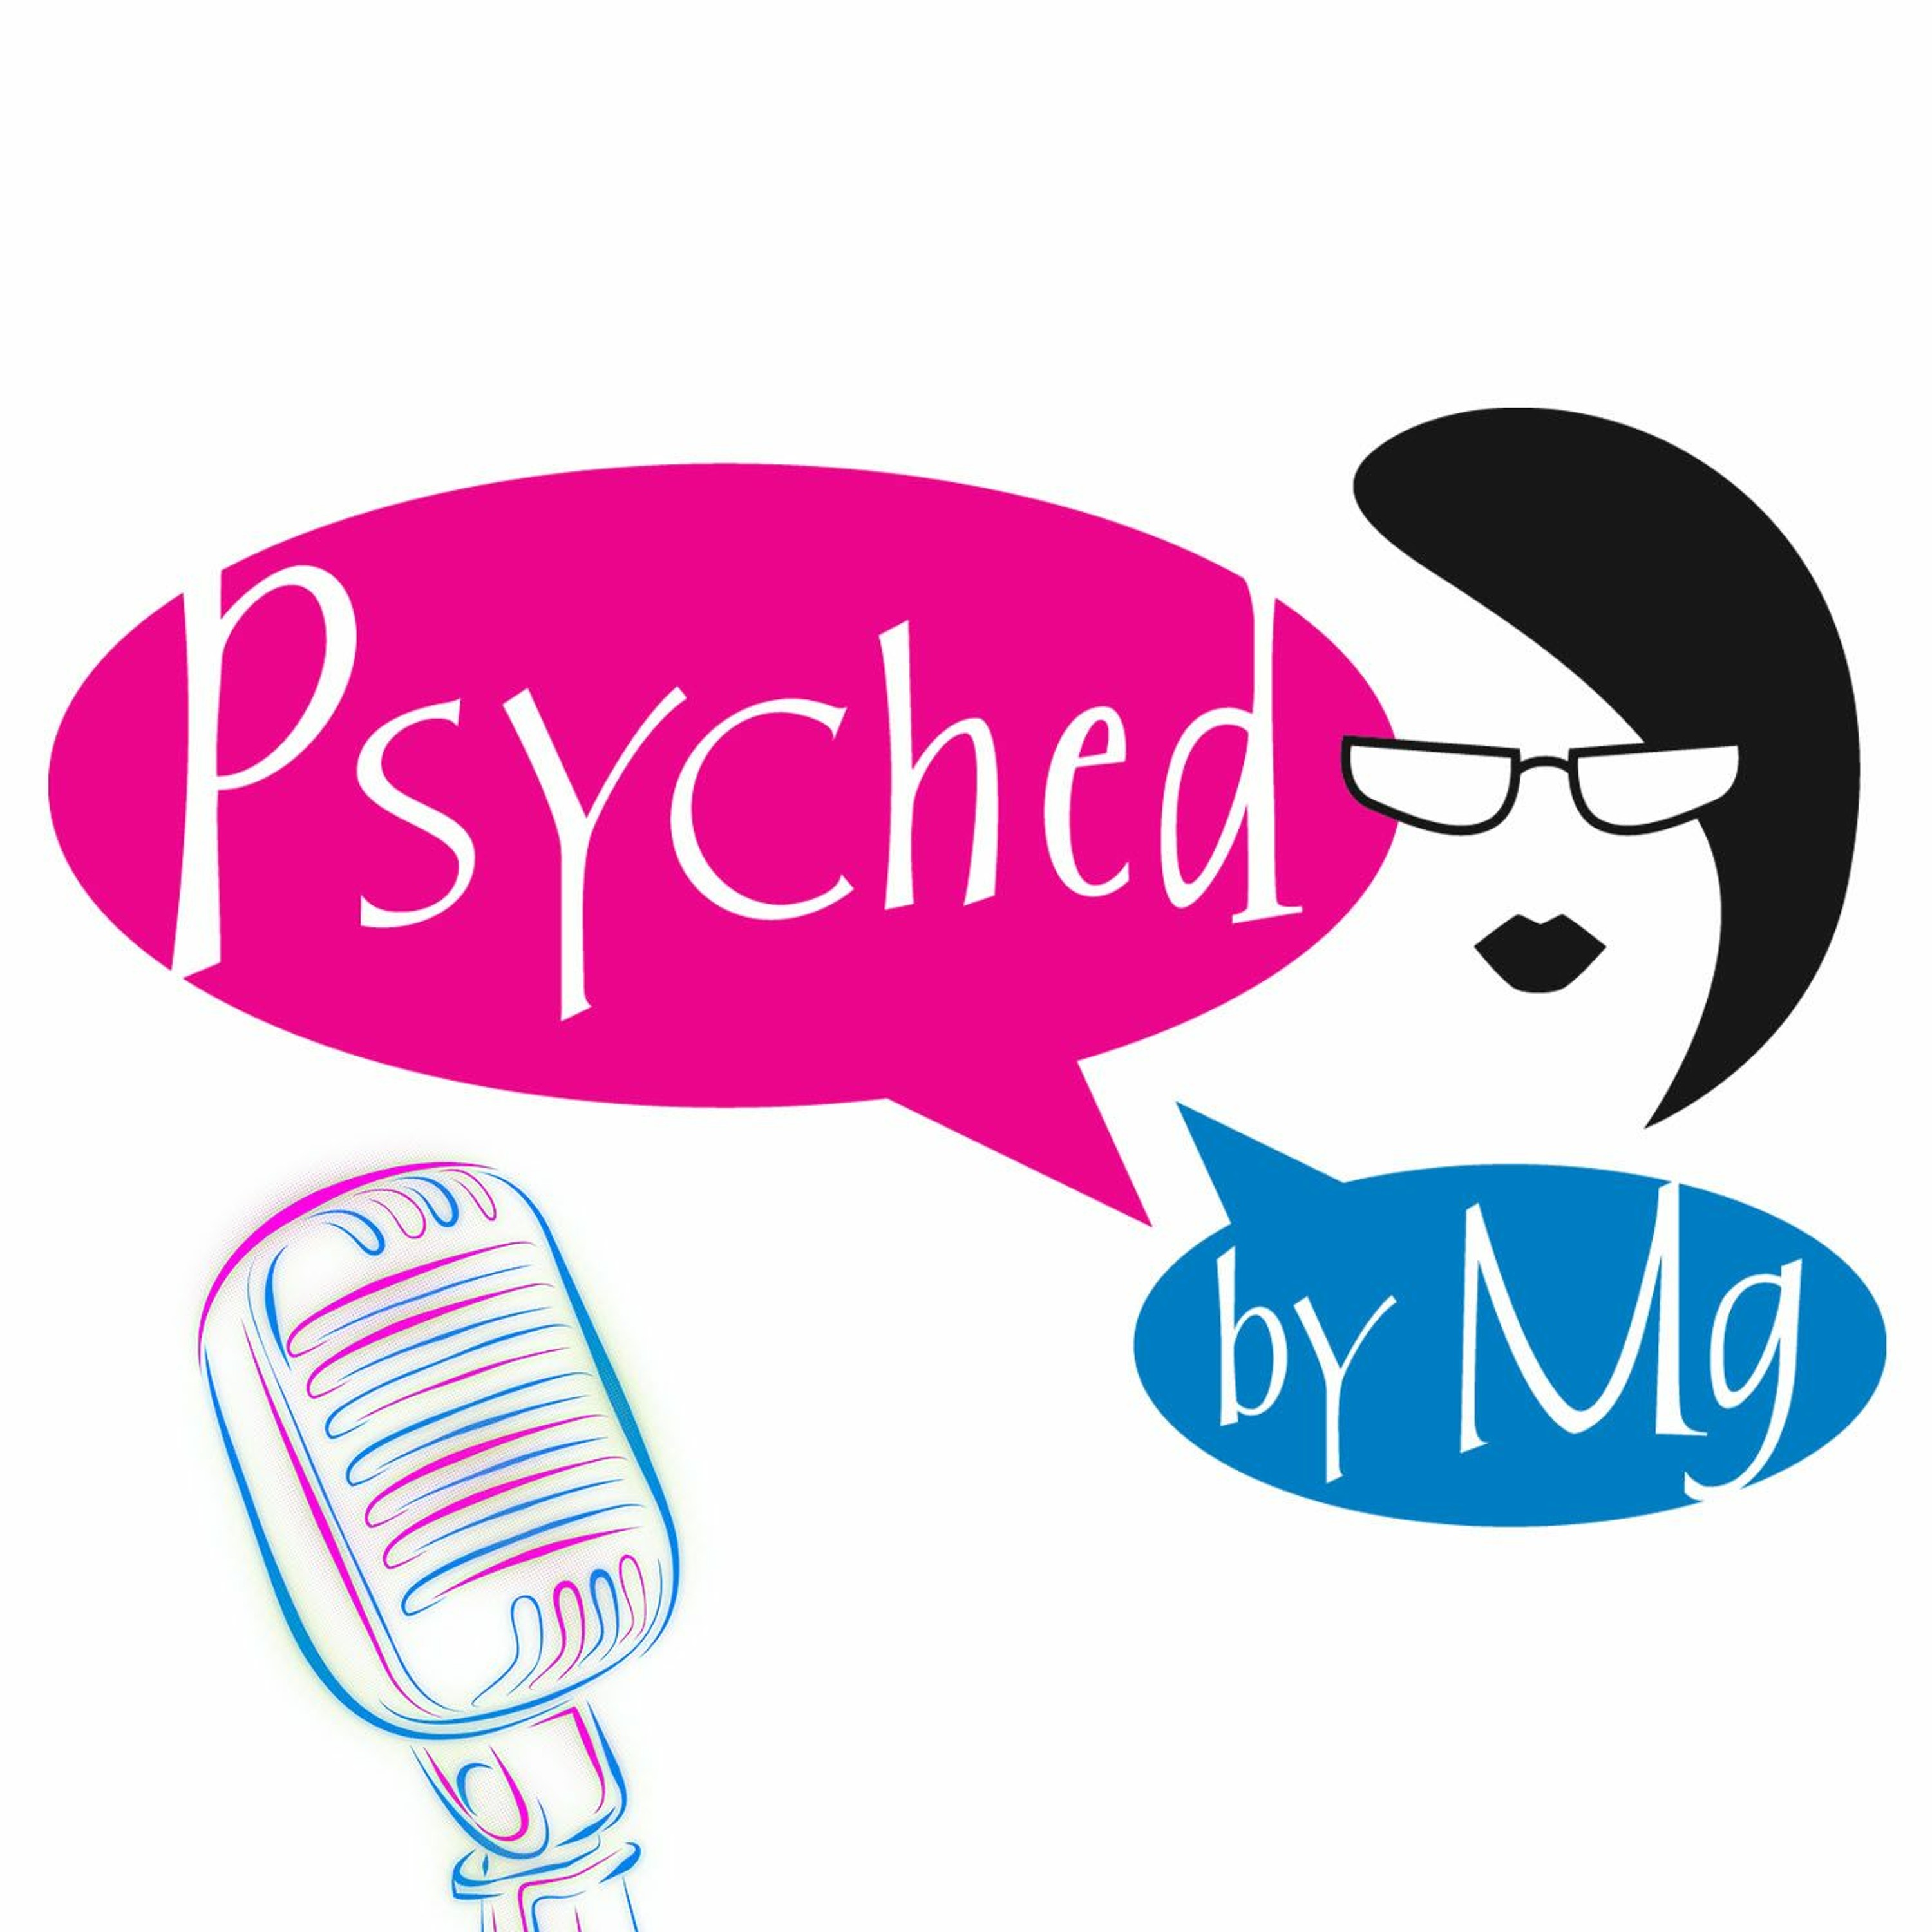 Psyched by MG - Episode 38 Creating Balance in Your Life